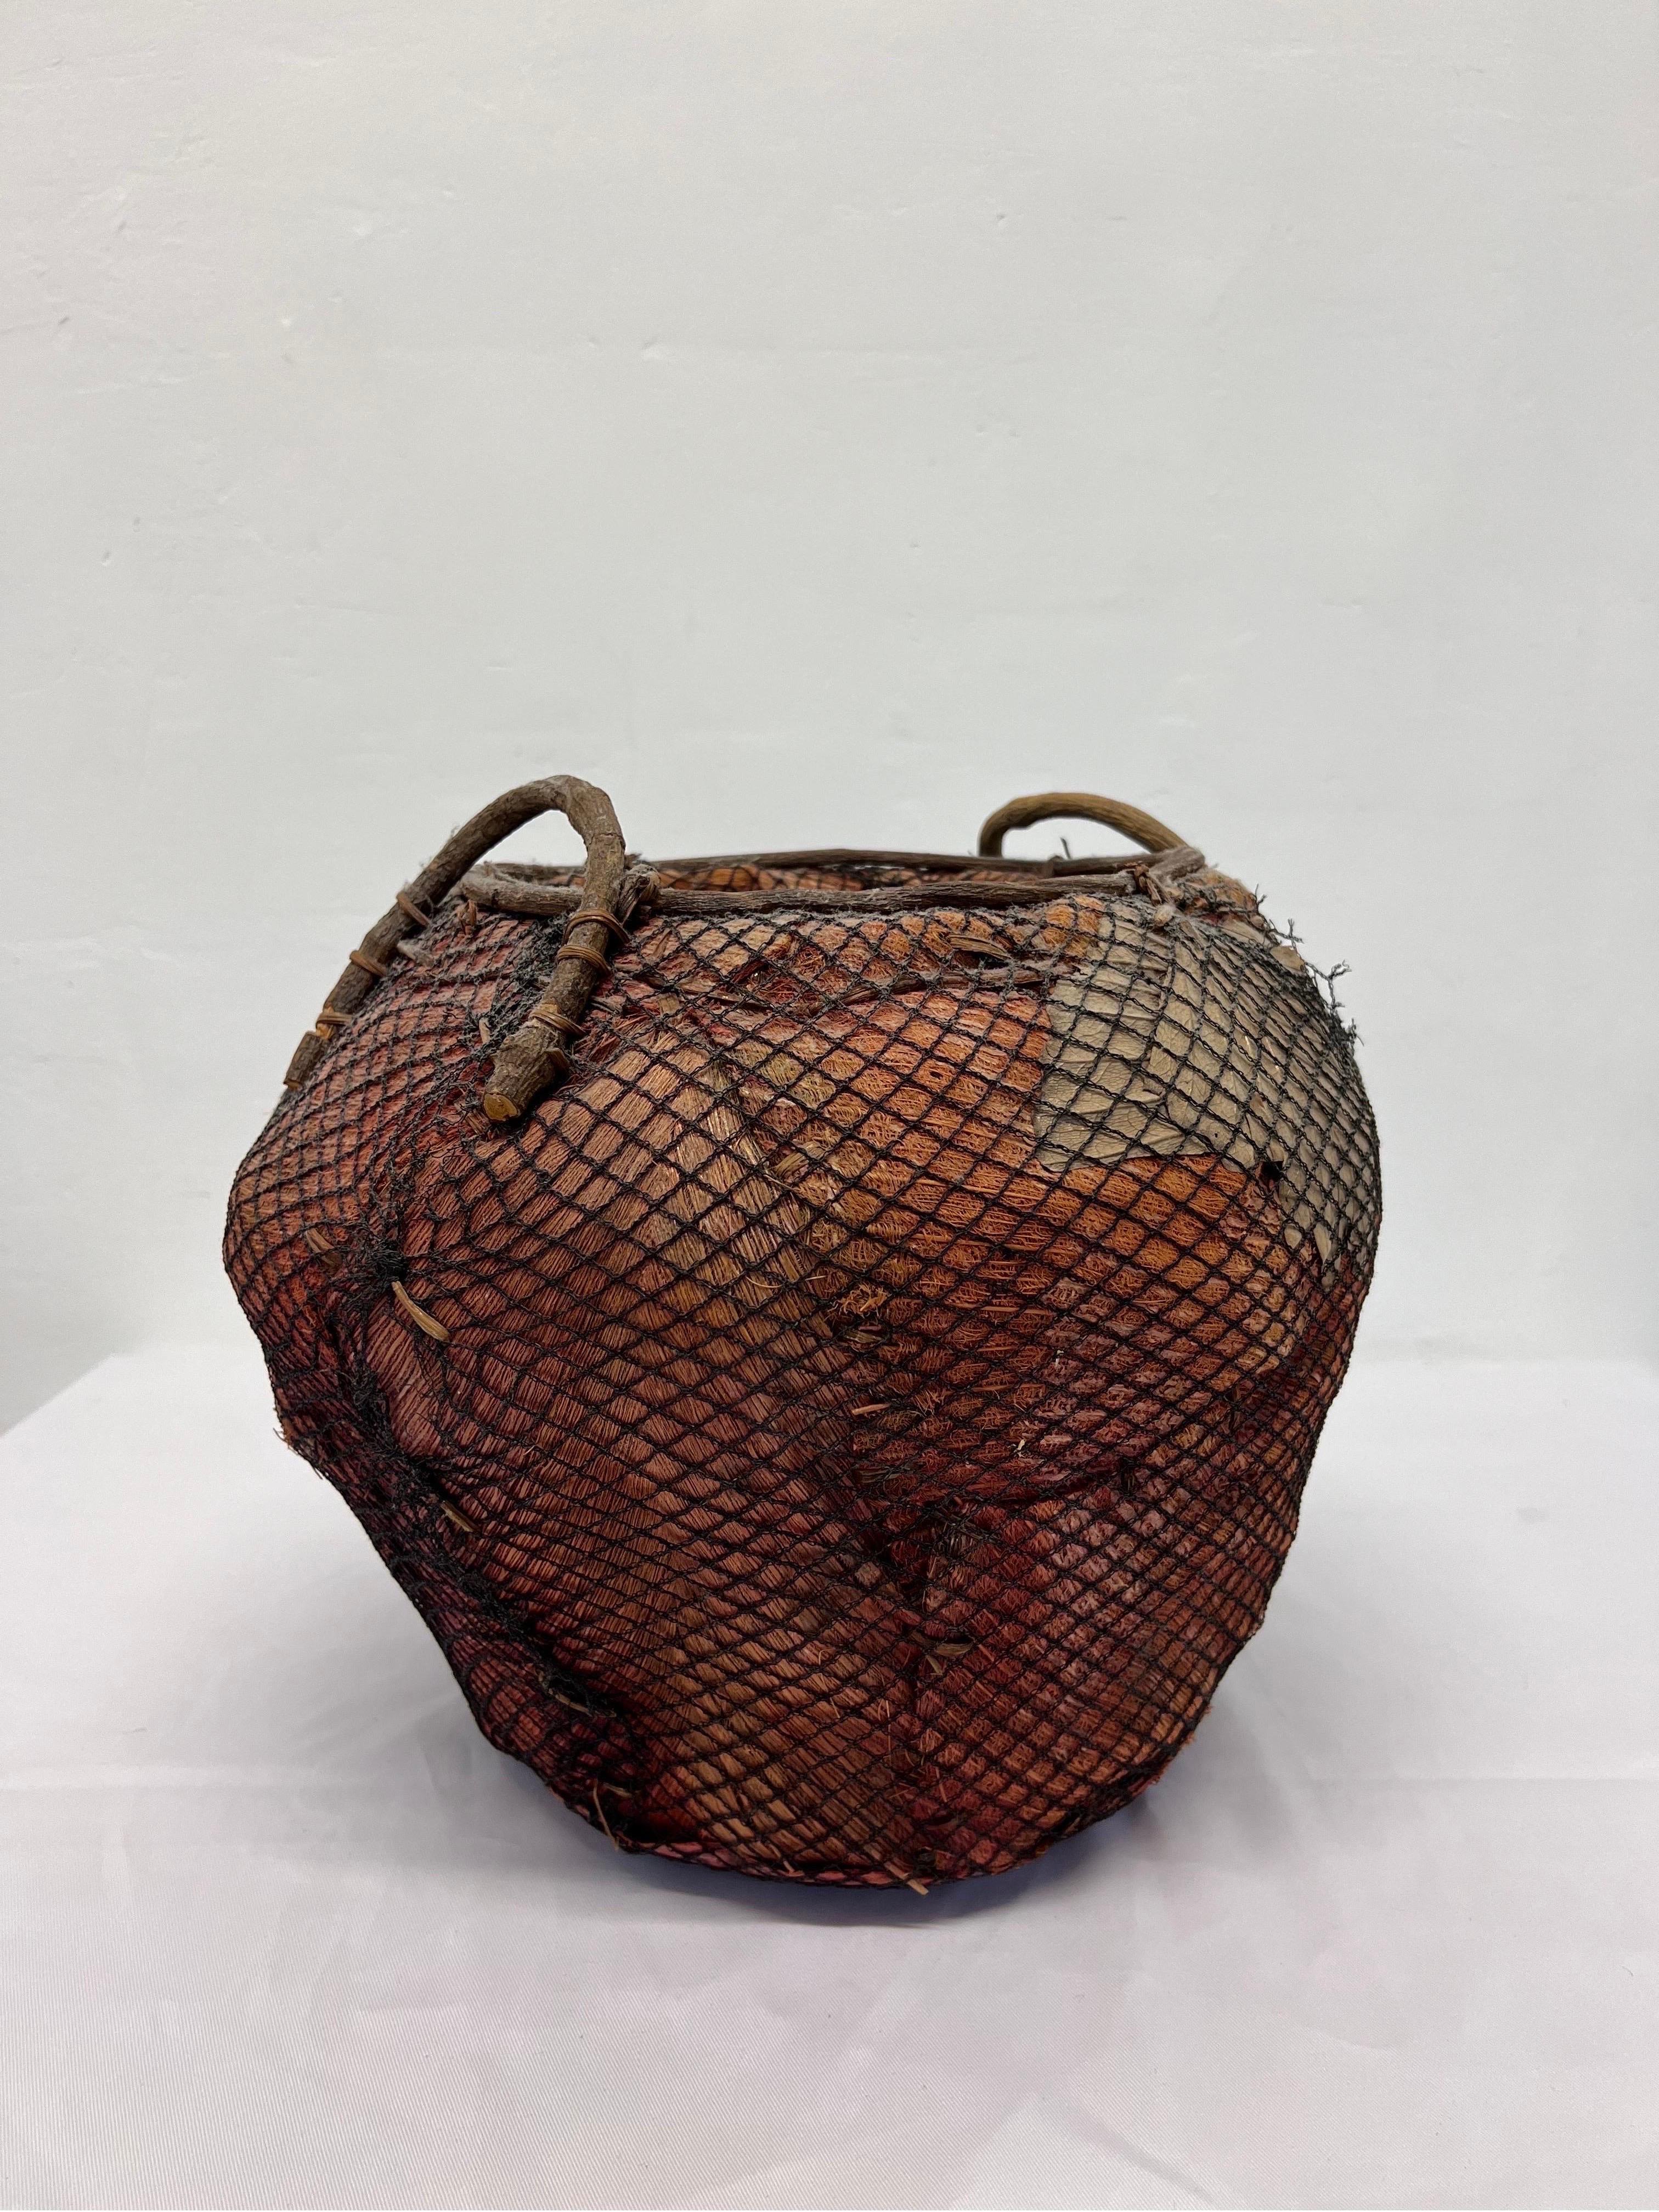 Philippine Handmade Natural Fiber and Leaf Basket Wrapped in Fish Net, 1970s For Sale